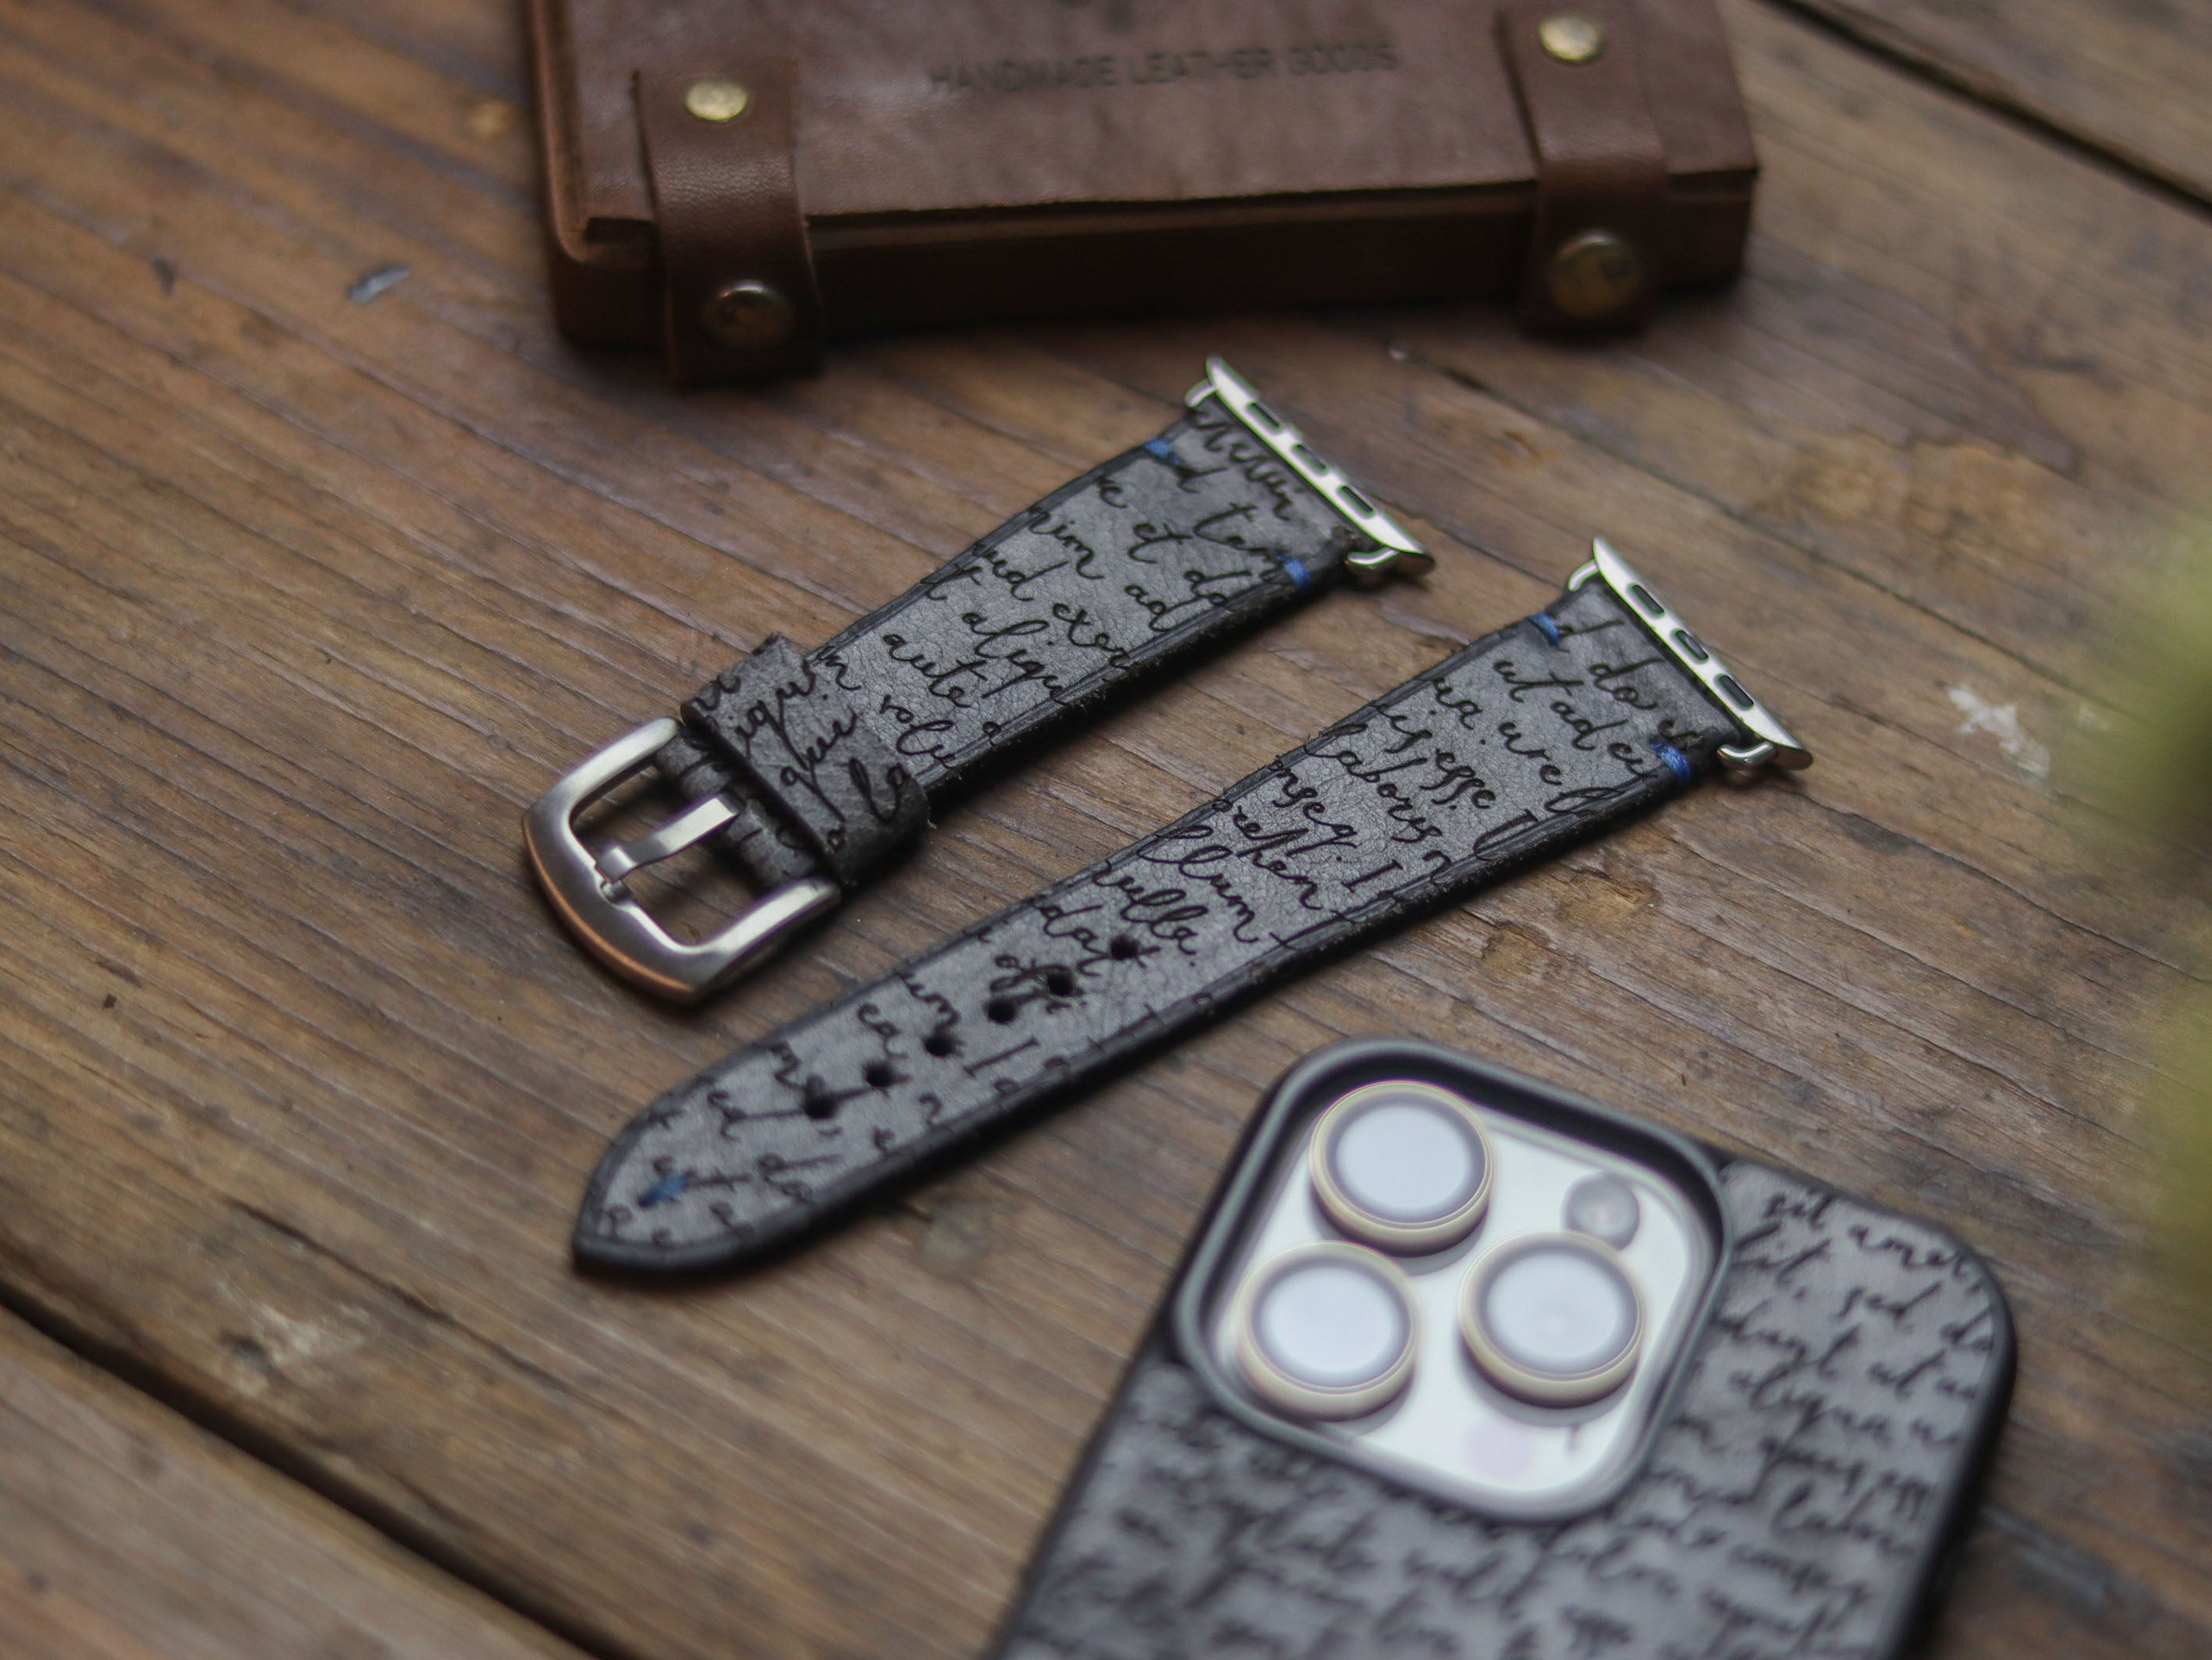 E3 ENGRAVED HAND-CRAFTED APPLE STRAPS - STONE BLUE